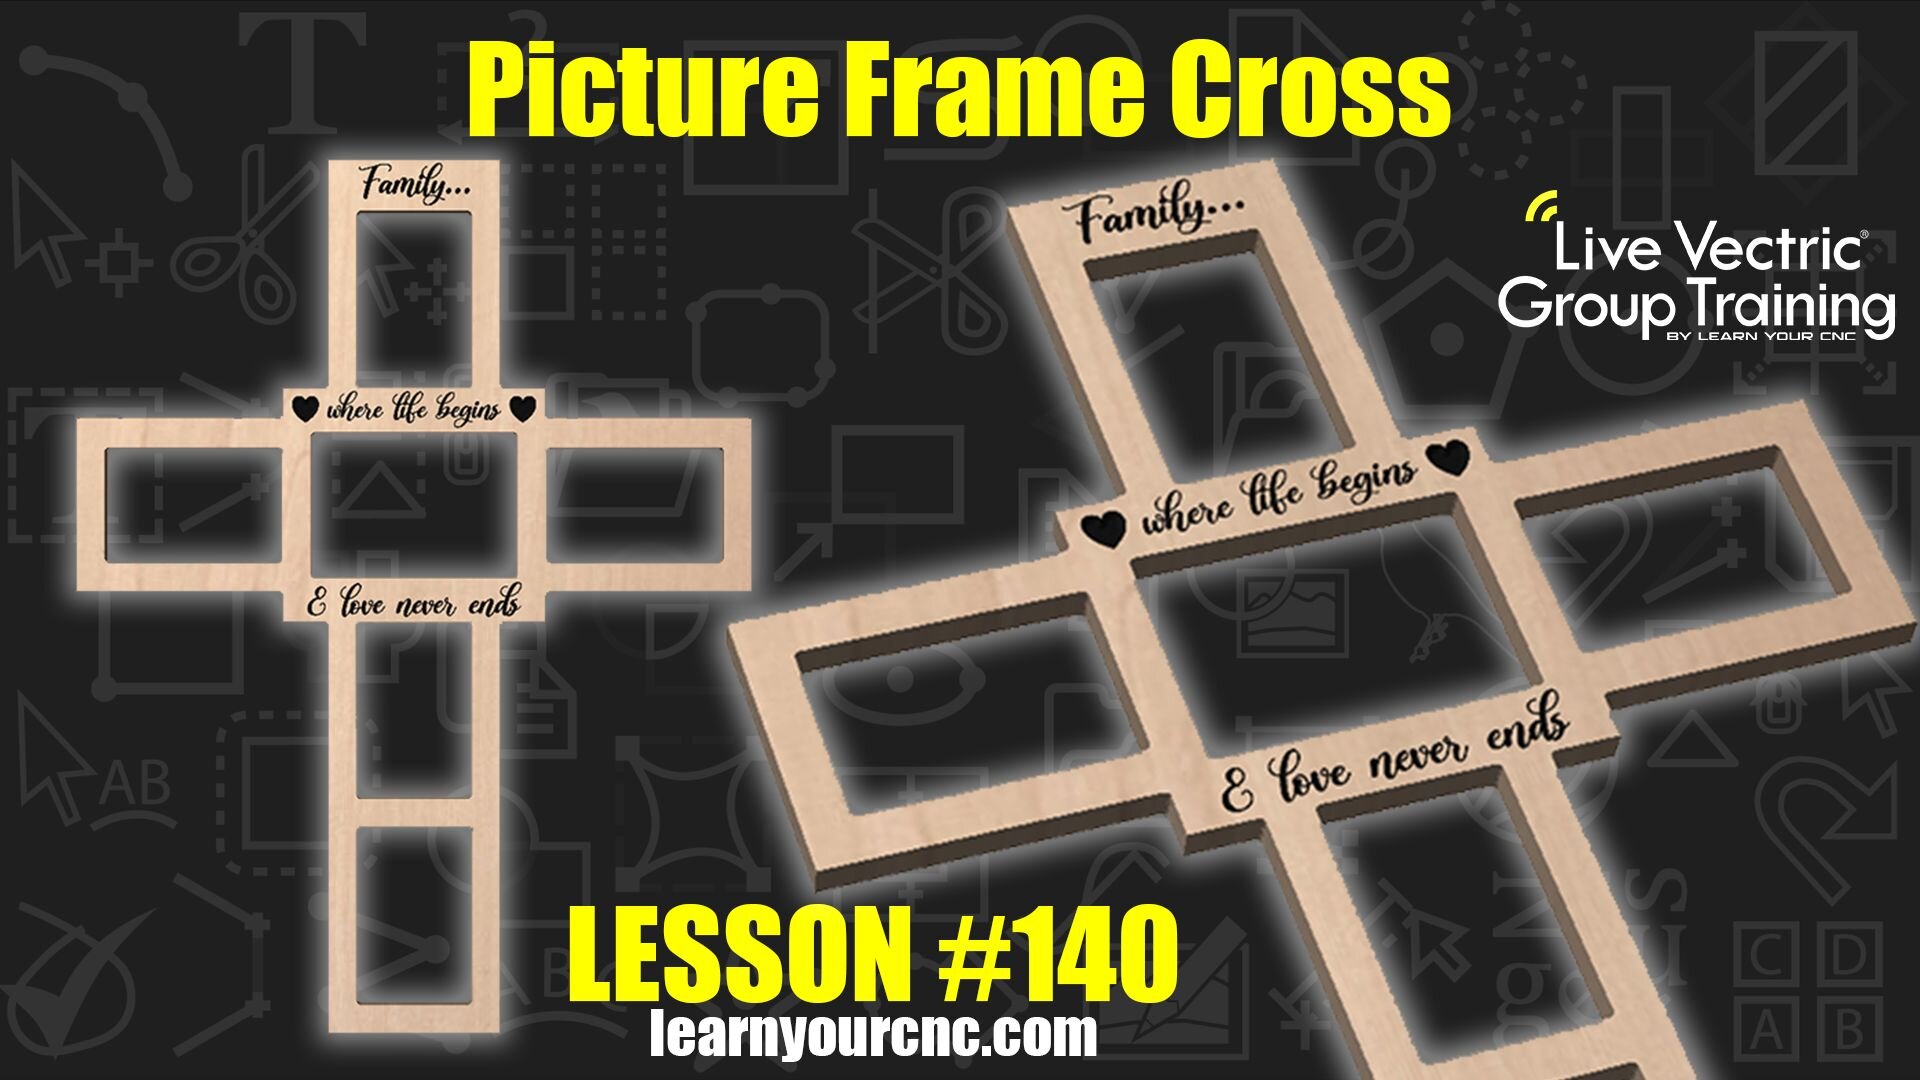 Thank you to everyone that showed up to our live Vectric training #140! In this training, we learned how to make a simple cross shaped picture frame that would make an excellent Mother's Day gift. As always, we also answered lots of great questions f